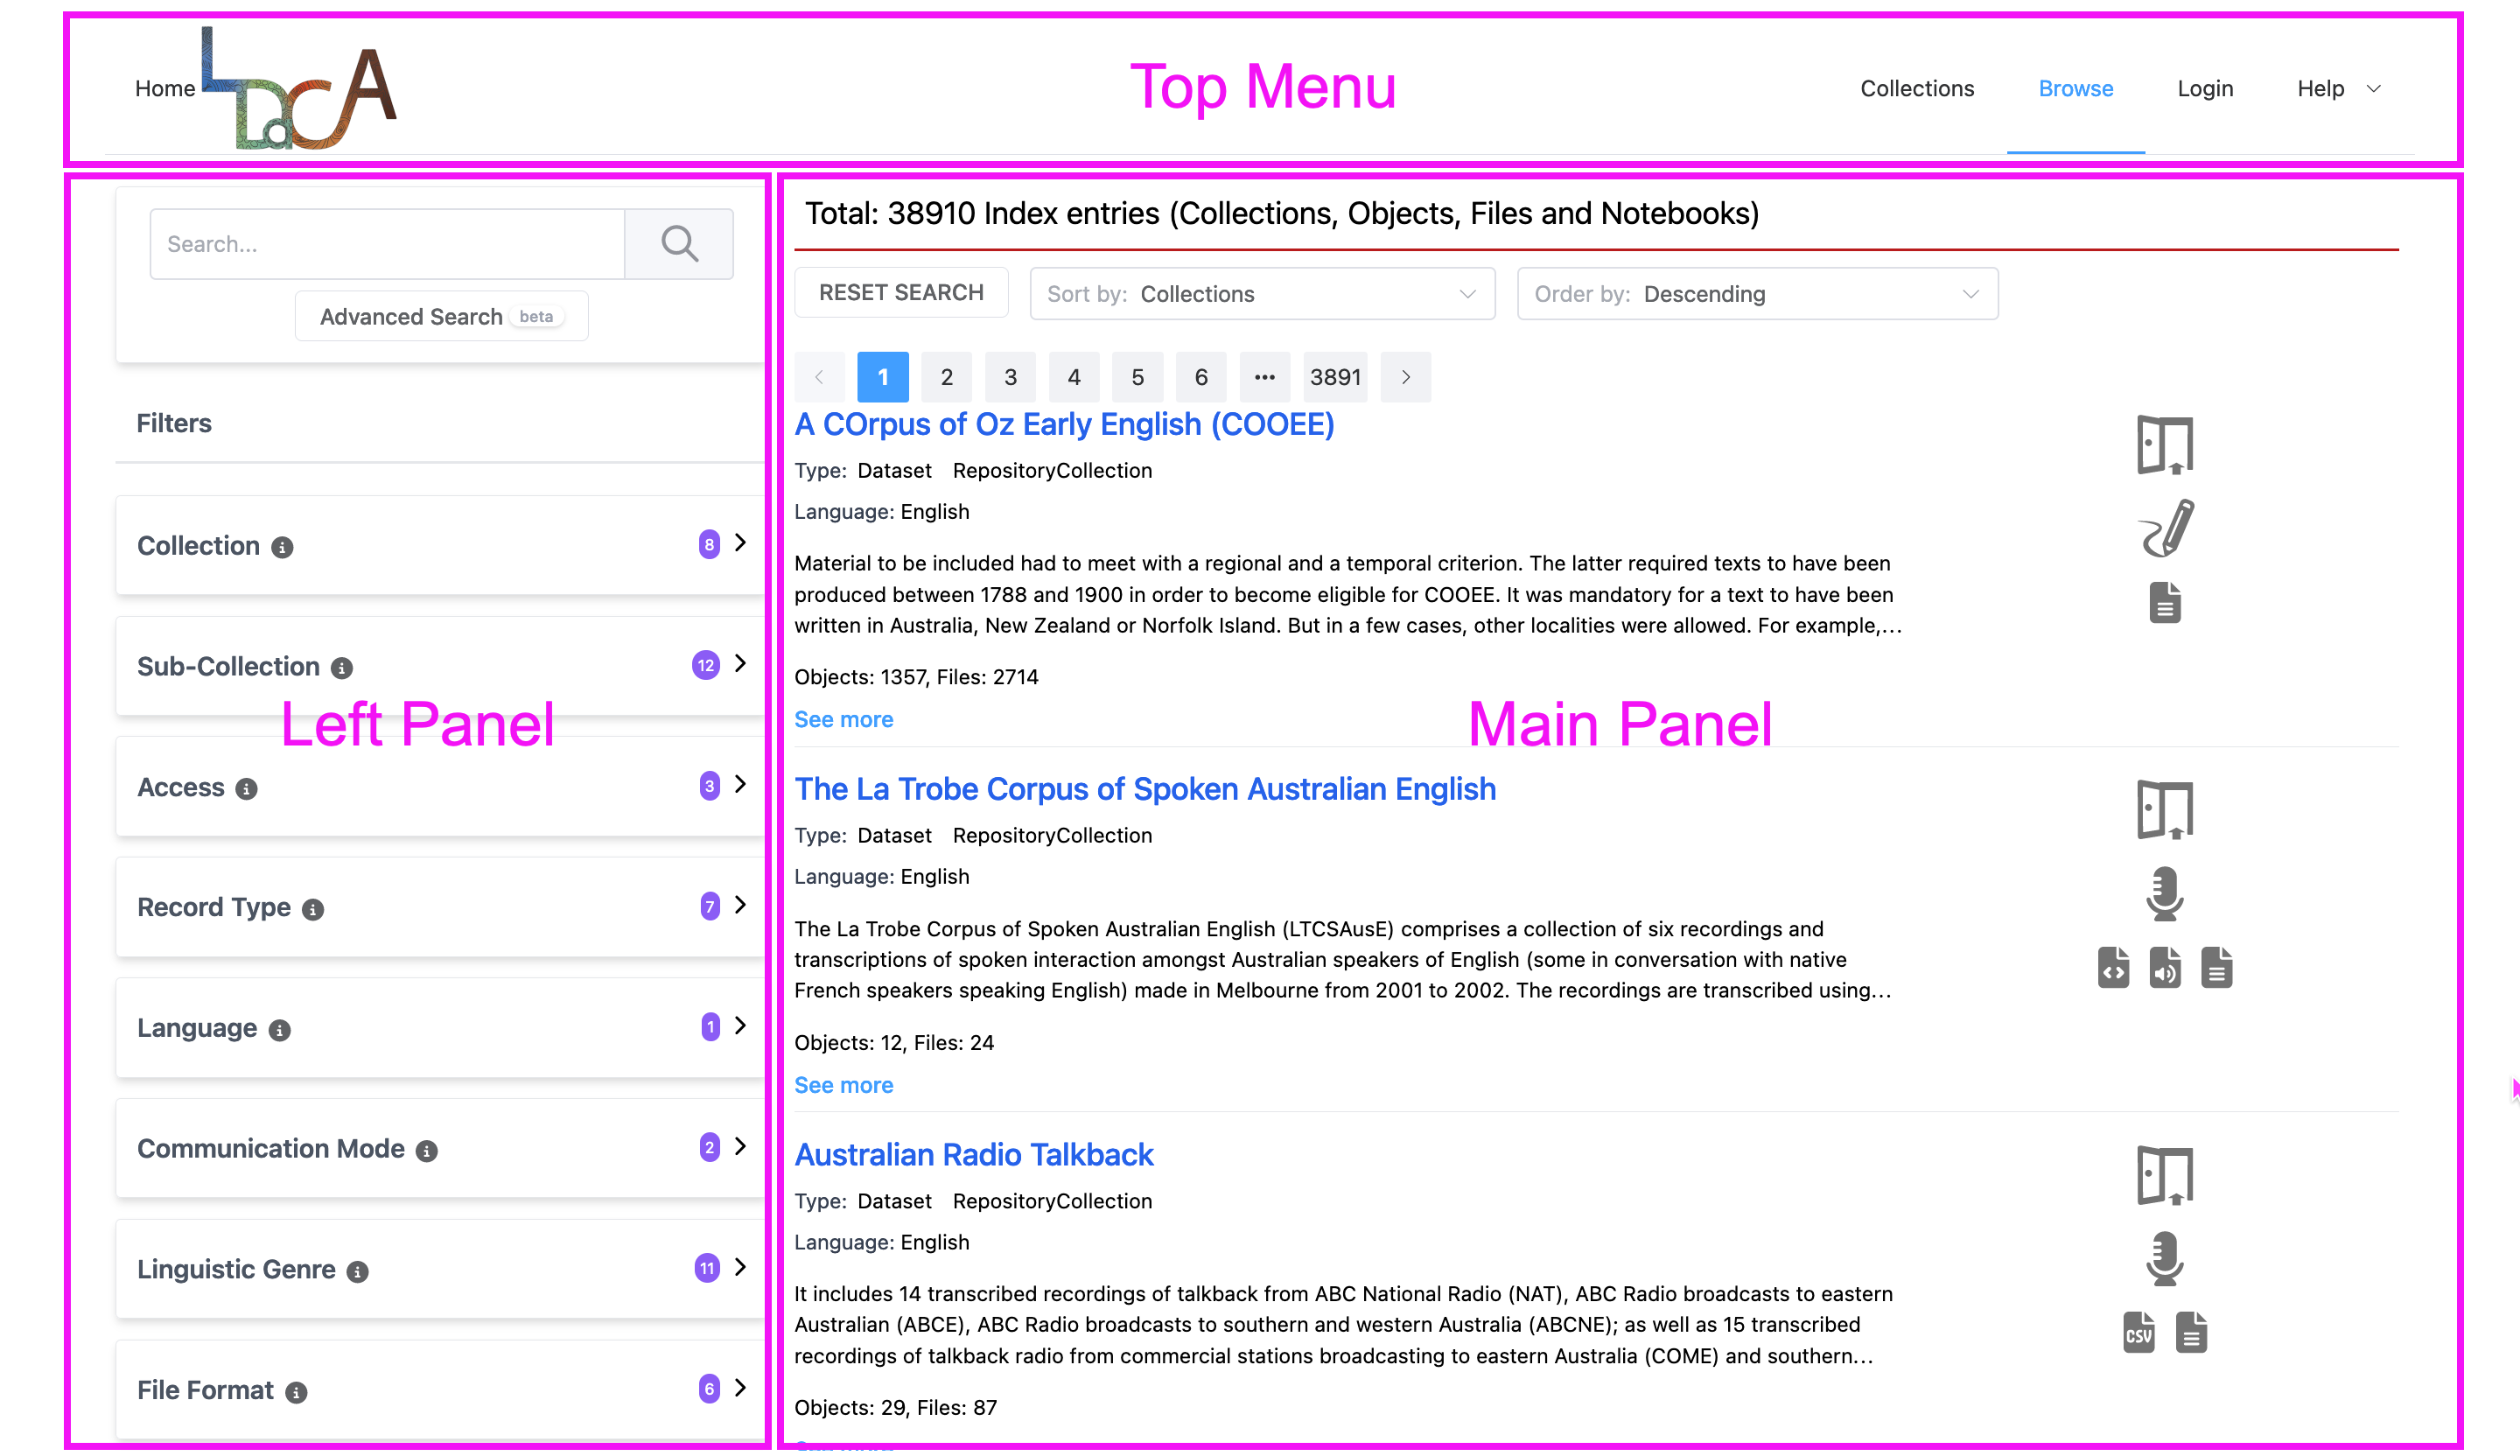 Home Page: Top Menu, Left Panel and Main Panel sections